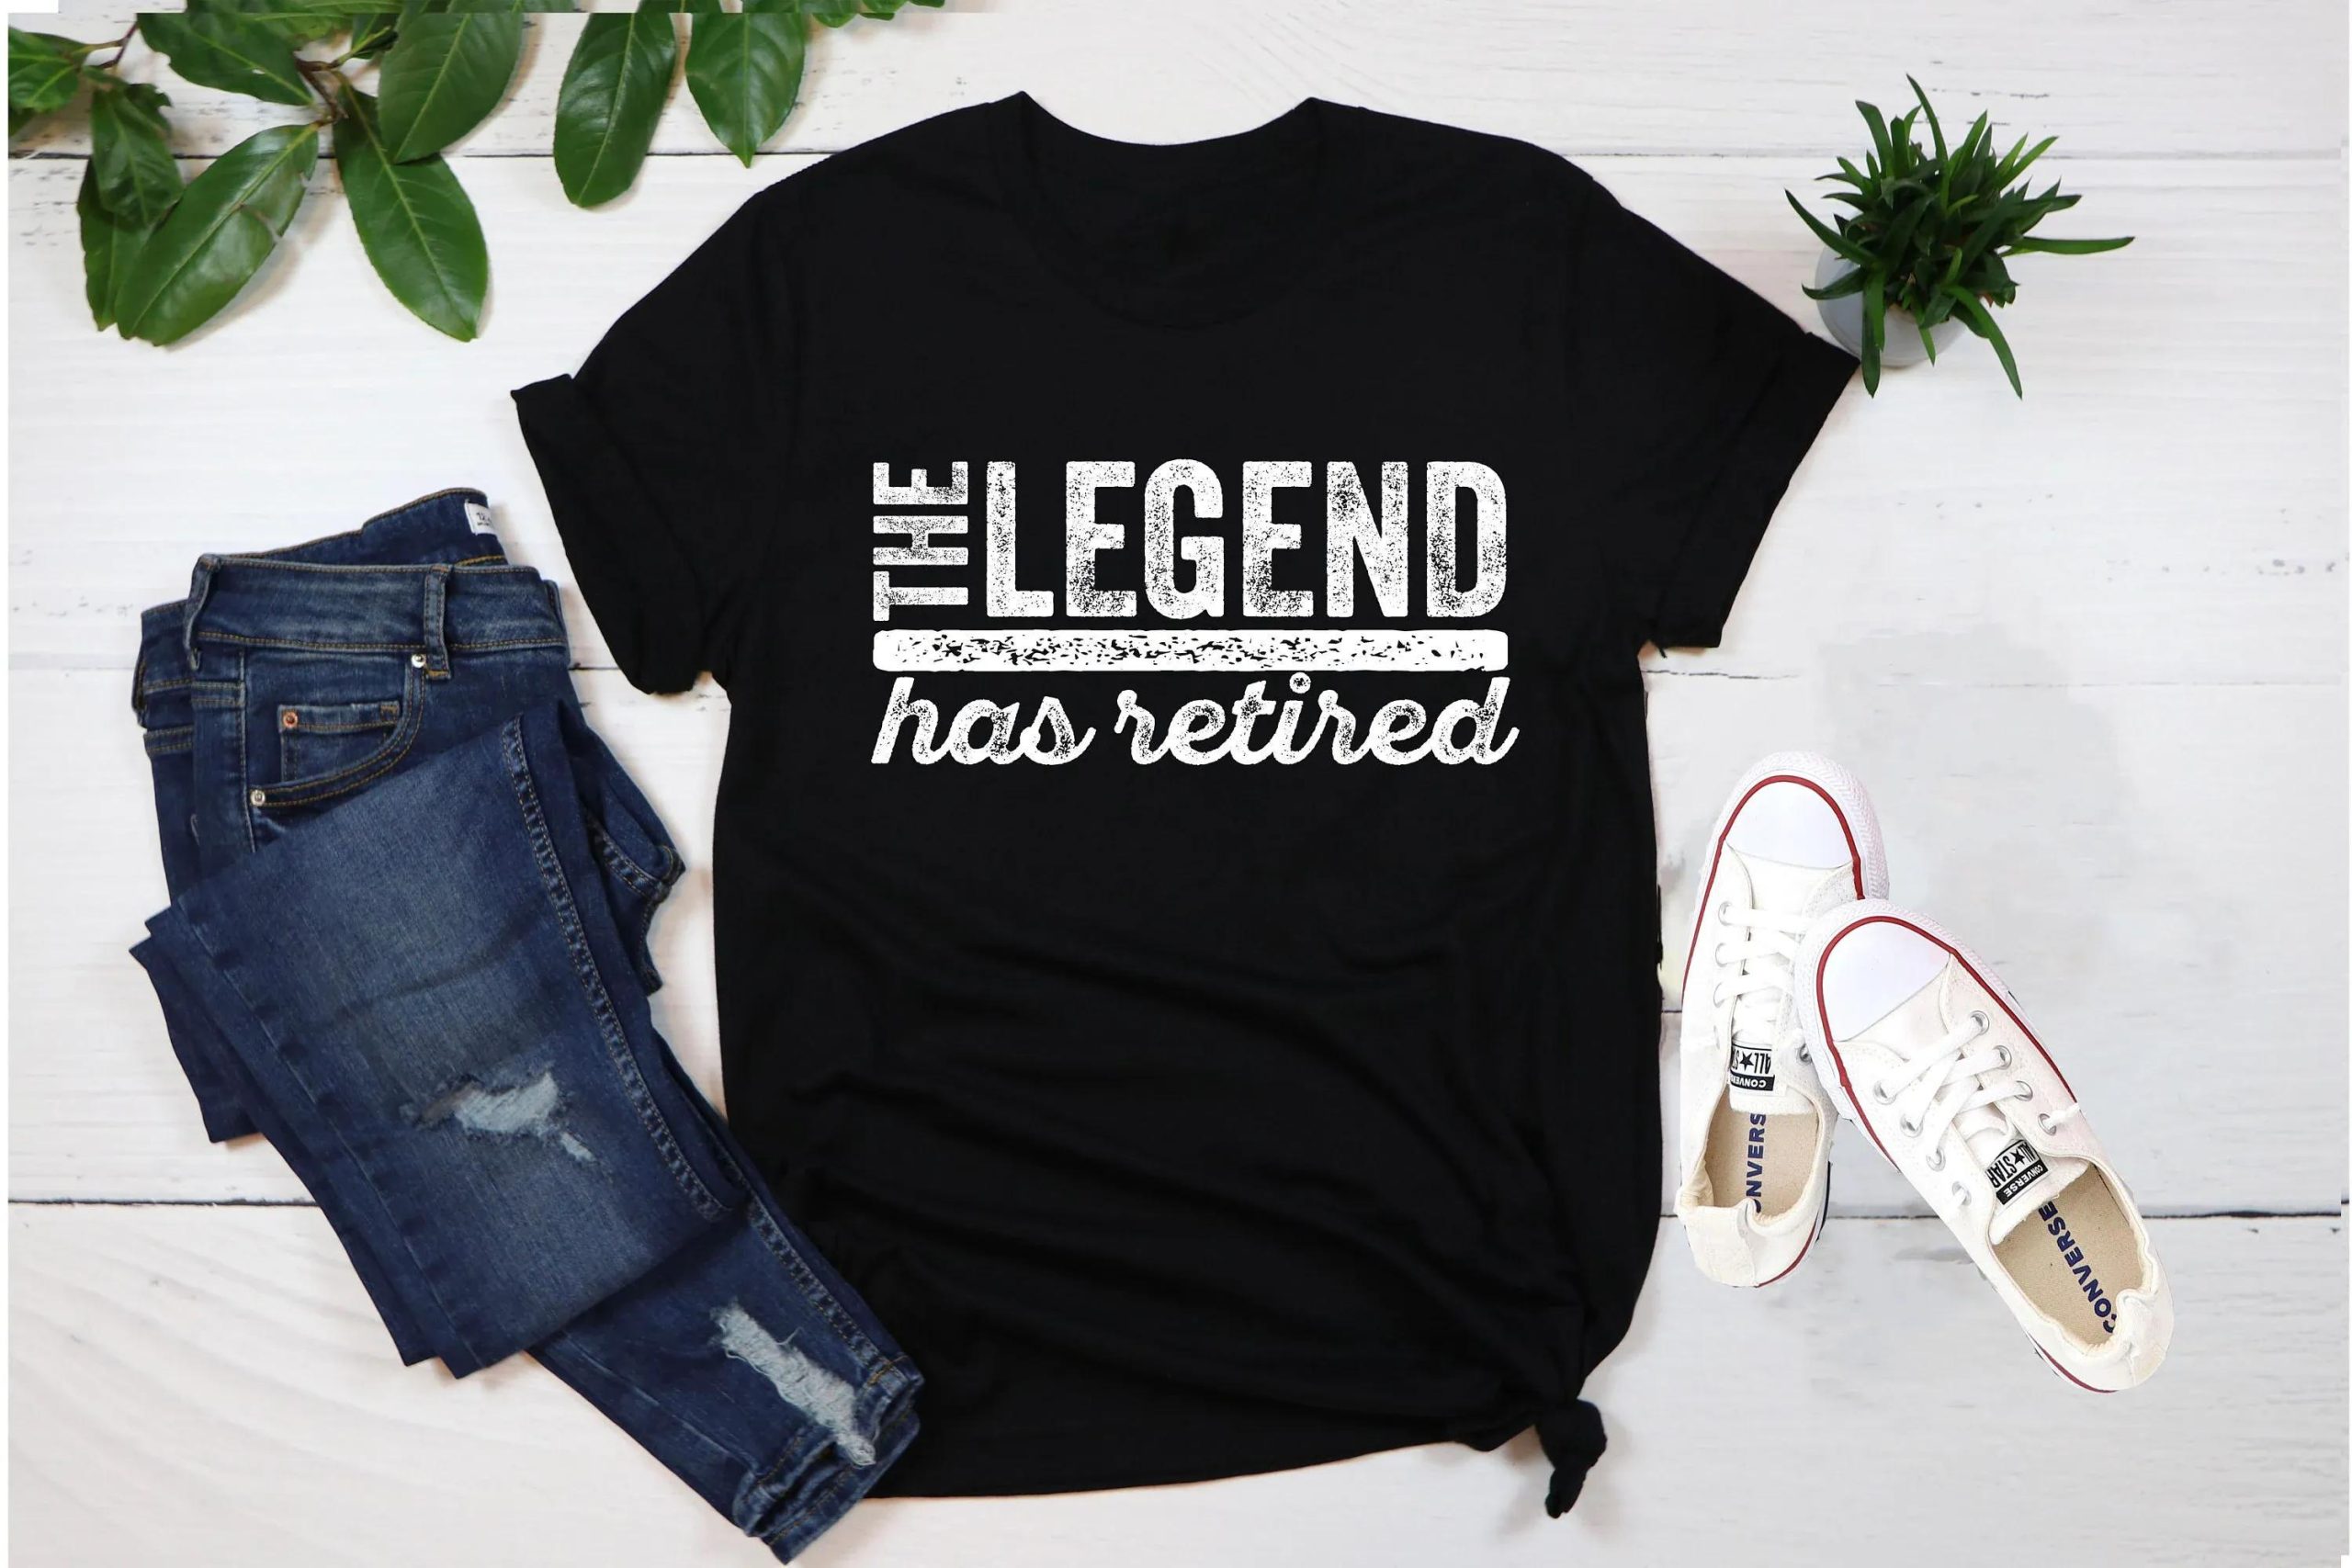 The Legend Has Retired T Shirt, Funny Retirement Gifts, Cool Retirement T-Shirts, Funny Shirts